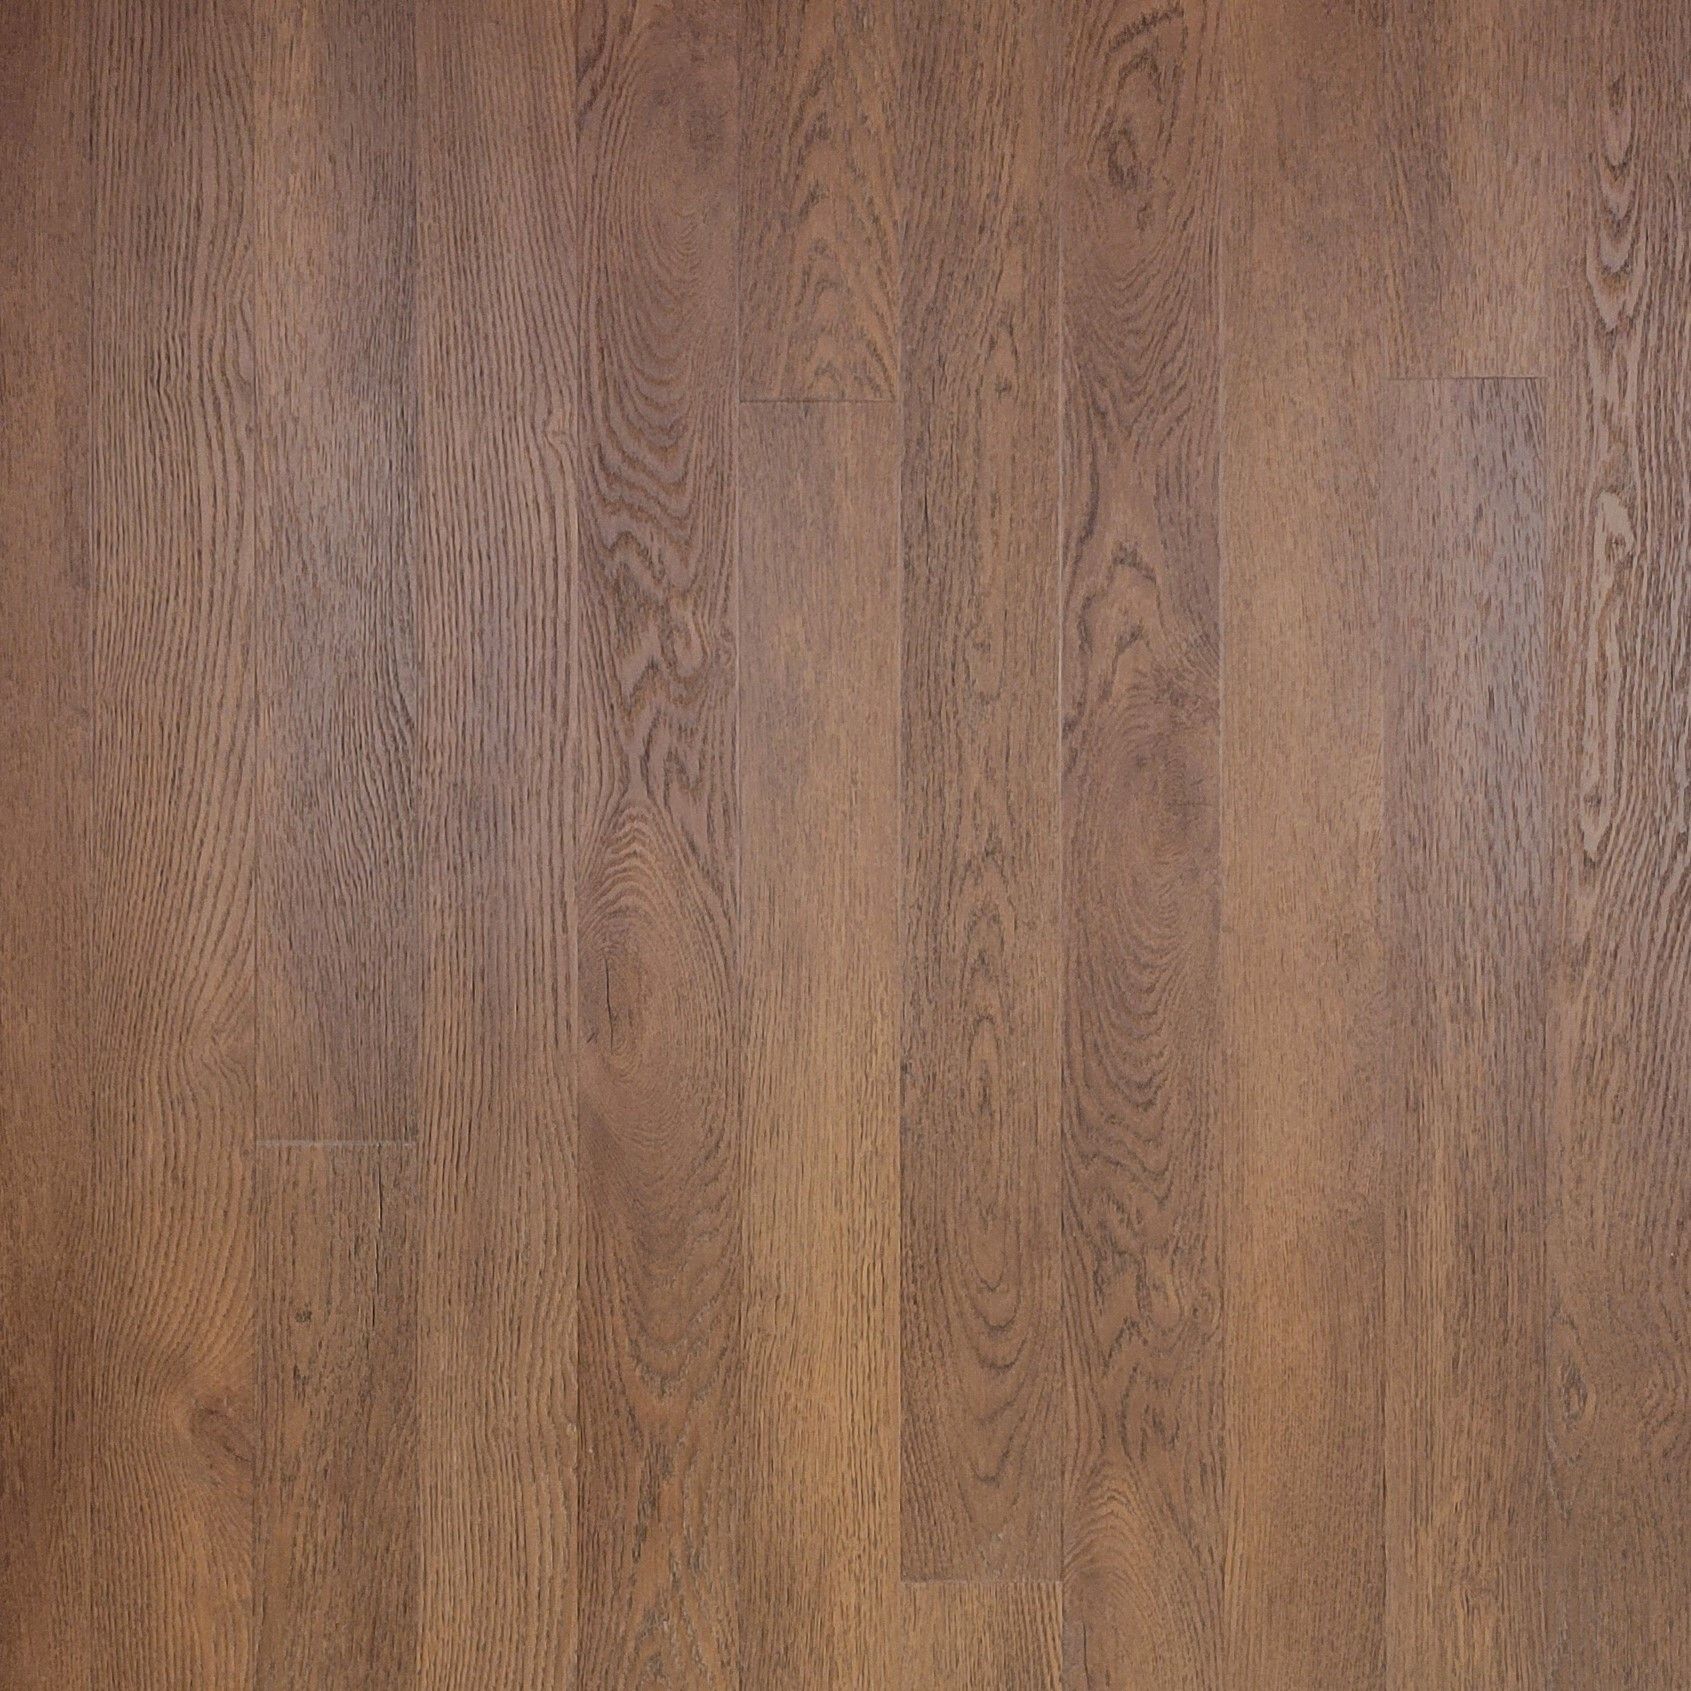 Rustic Natural Vinyl Planks : Rustic Natural Vinyl Planks Exploring the Beauty of Nature With Durable Flooring Option